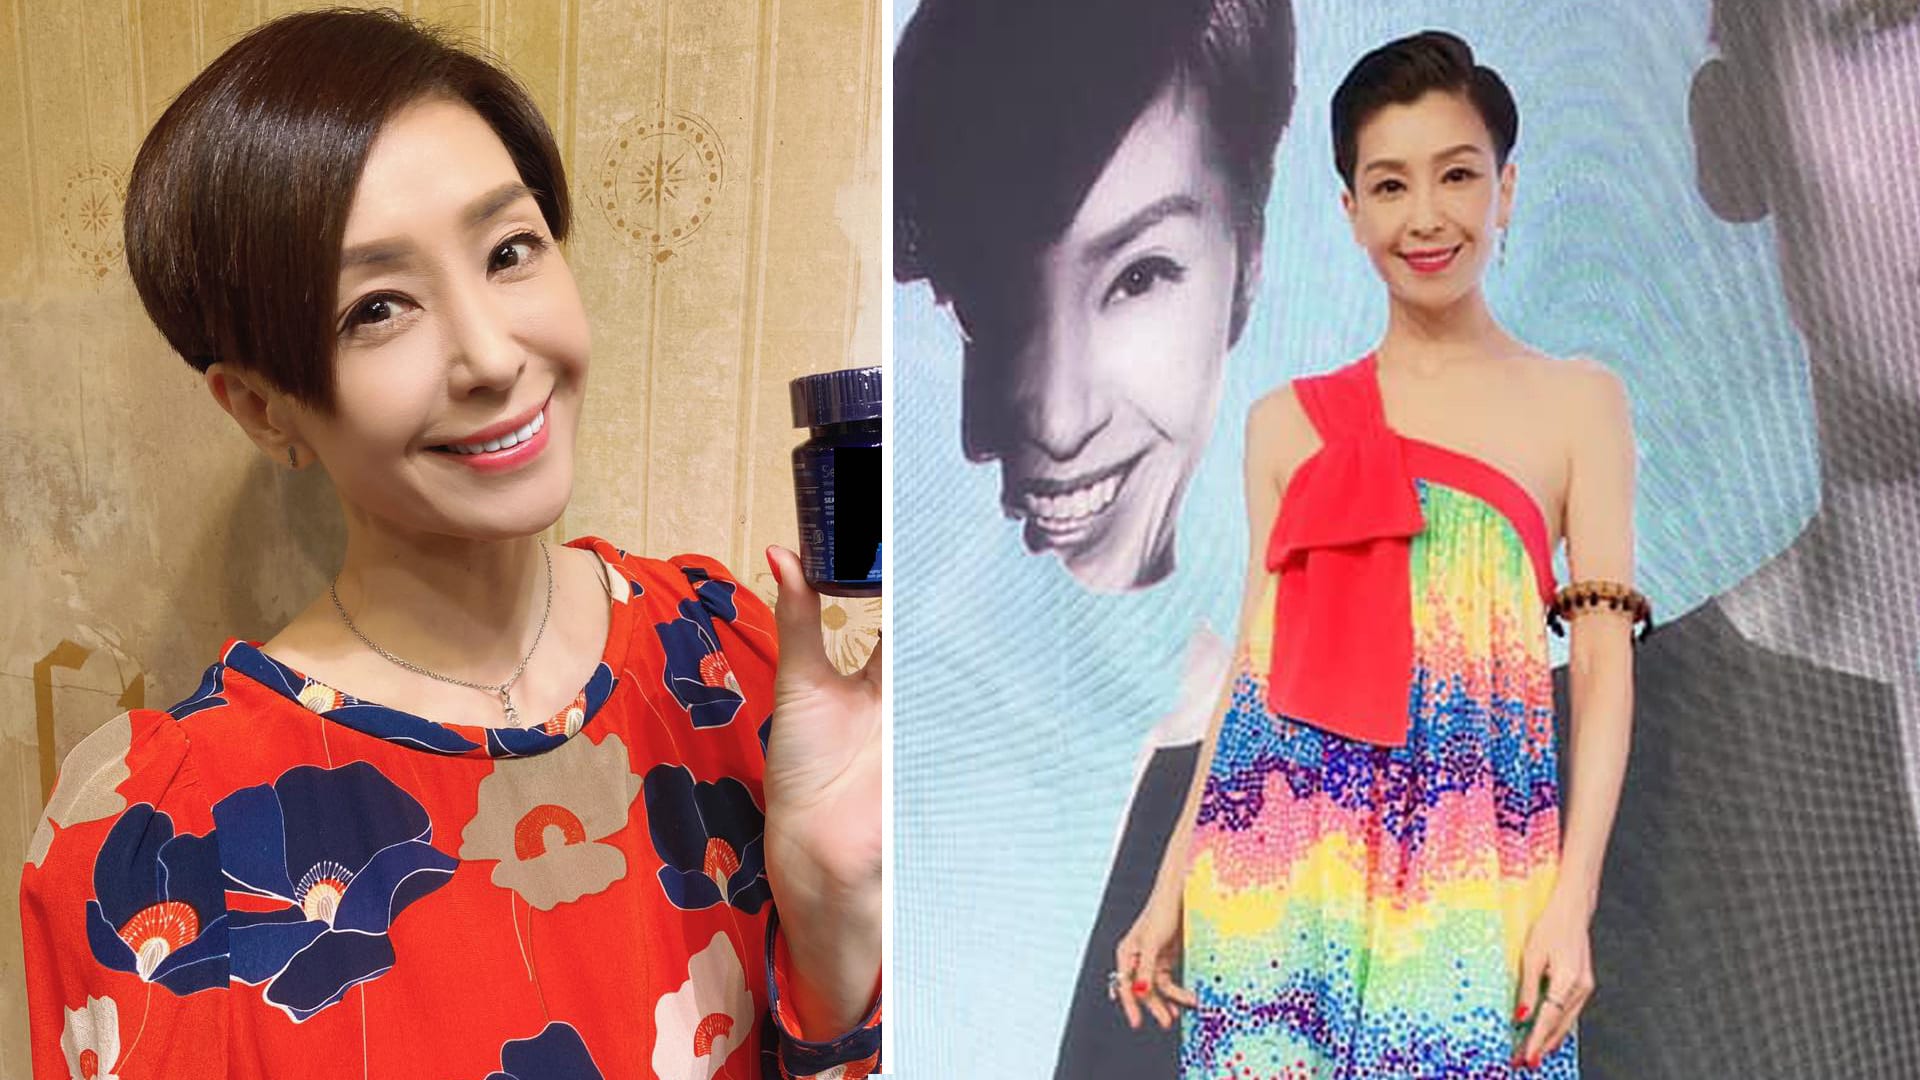 HK Actress Christine Ng, 52, Rubbishes Claims That She Is Going For “Womb Therapy” To Improve Fertility